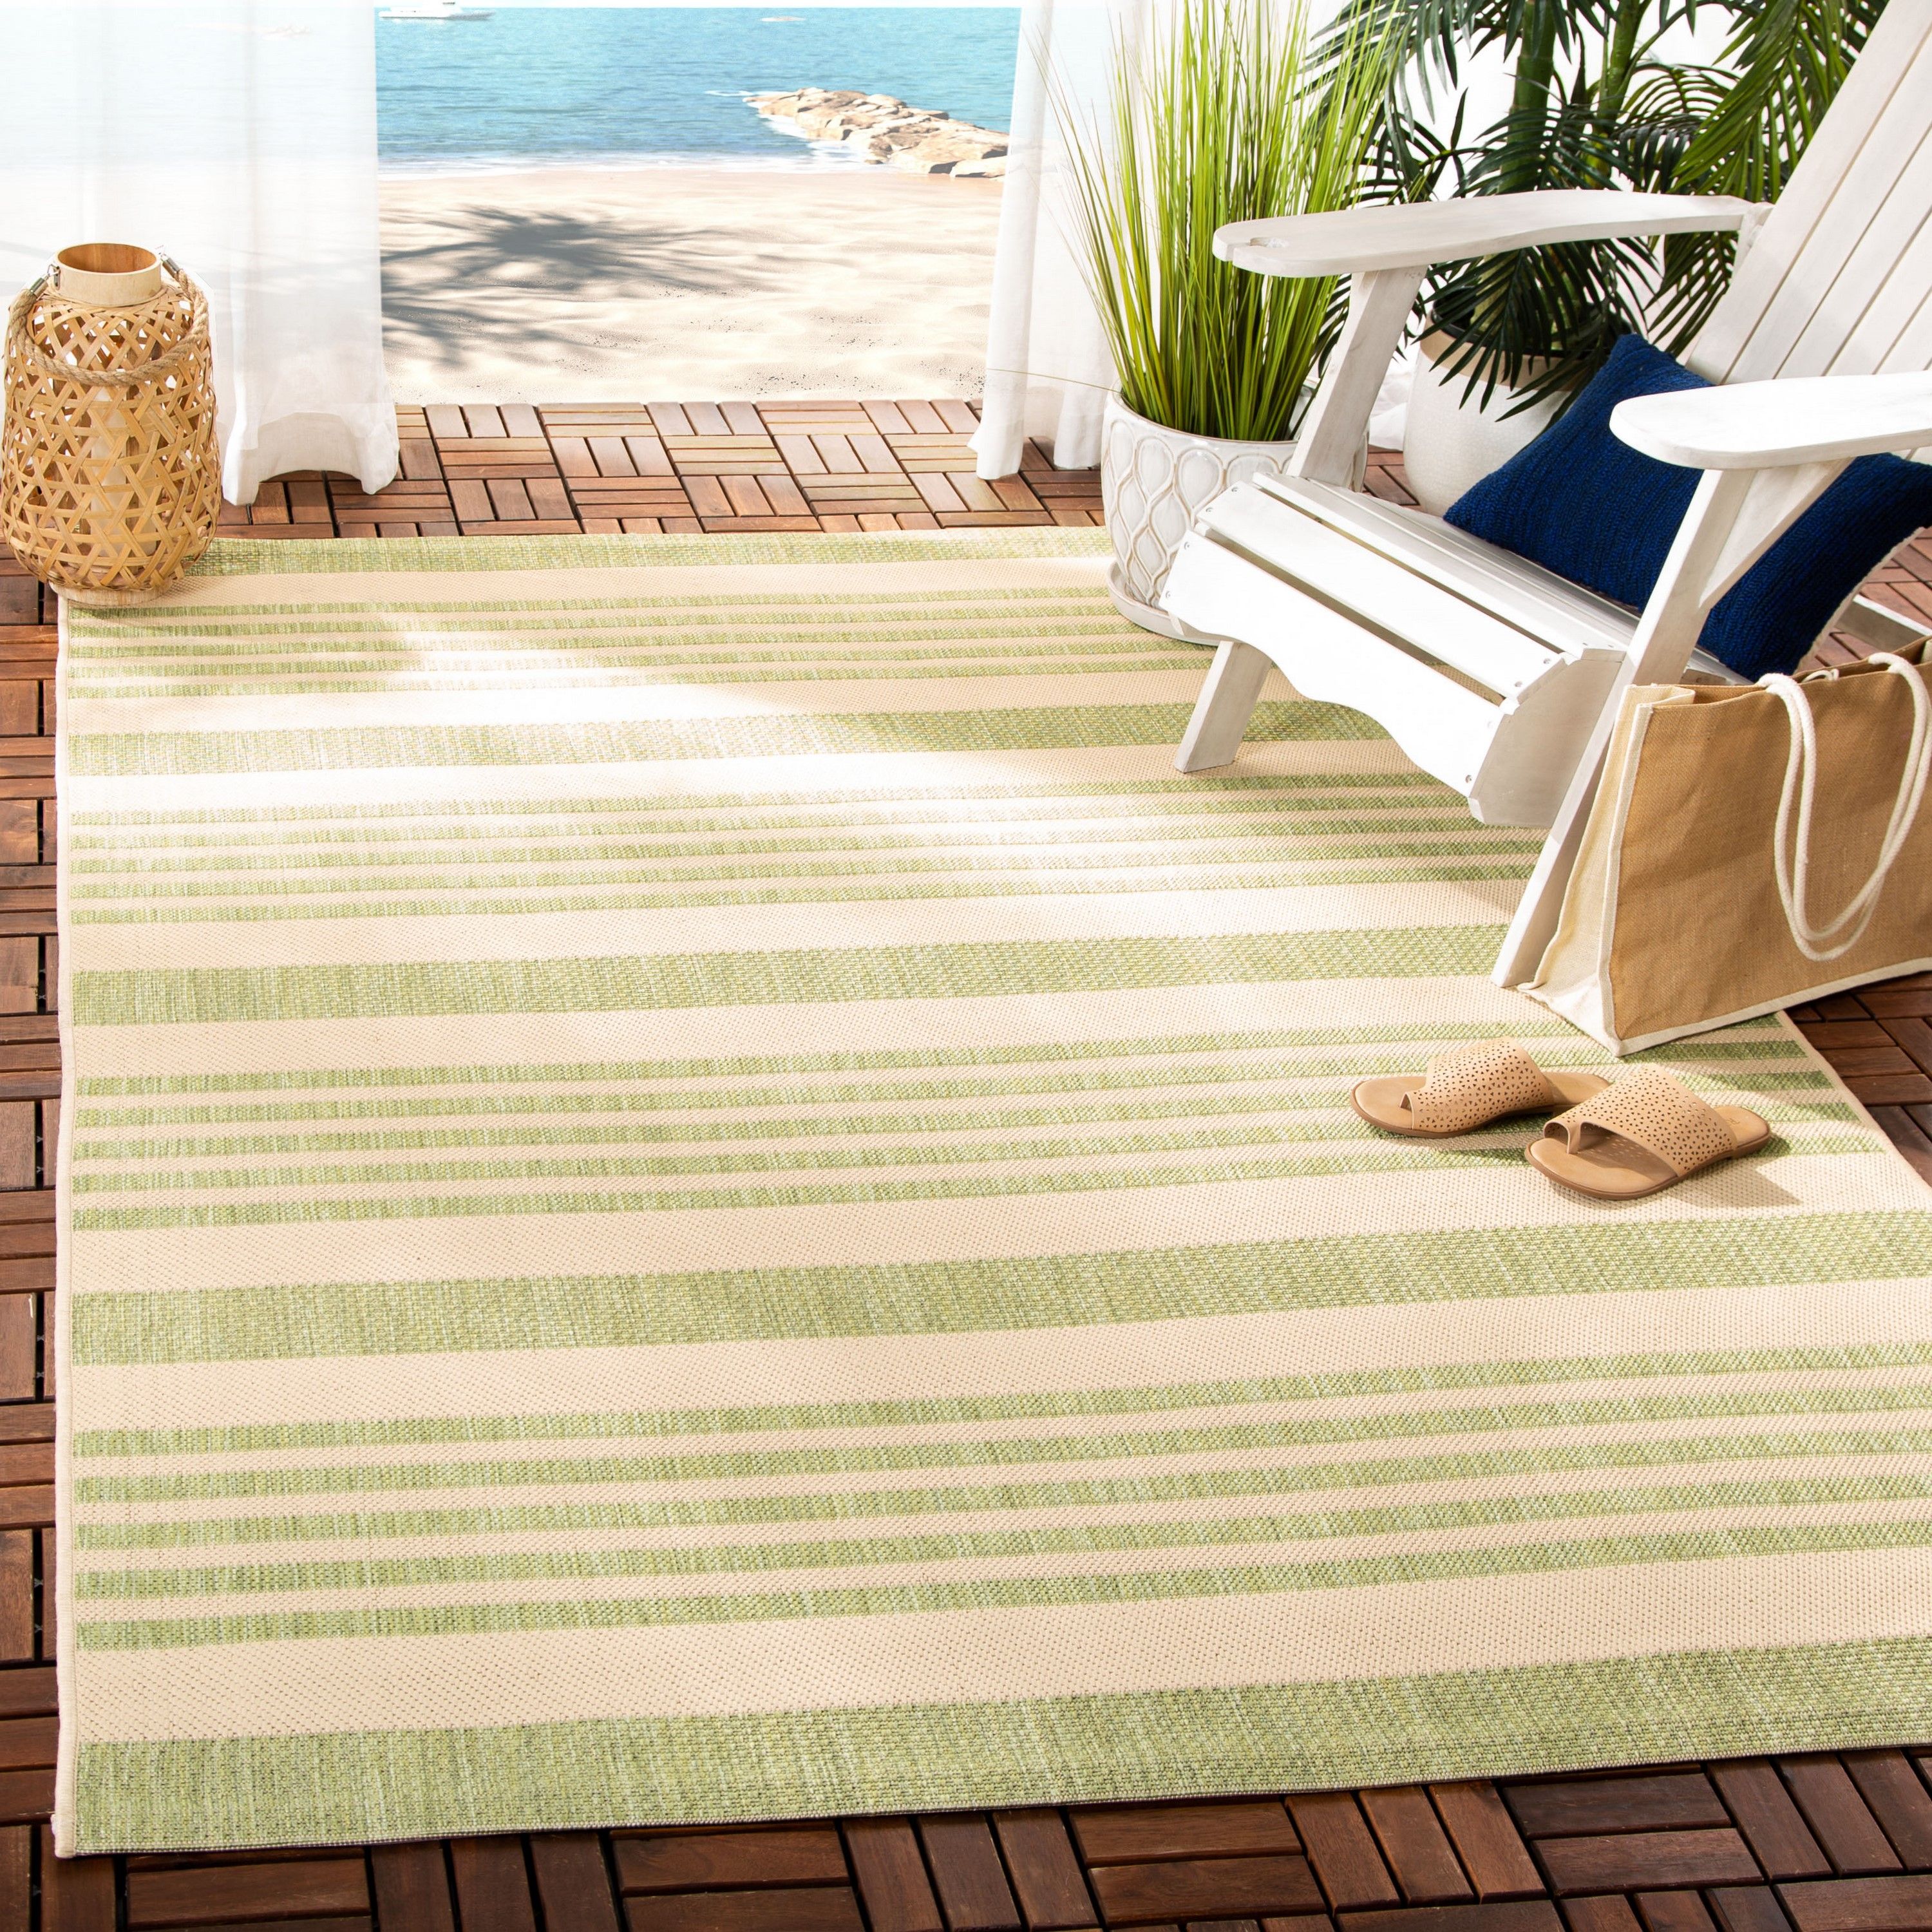 Safavieh Courtyard Dobby 5 X 5 Beige/Sweet Pea Square Indoor/Outdoor Stripe  Coastal Area Rug In The Rugs Department At Lowes With Coastal Square Rugs (Photo 14 of 15)